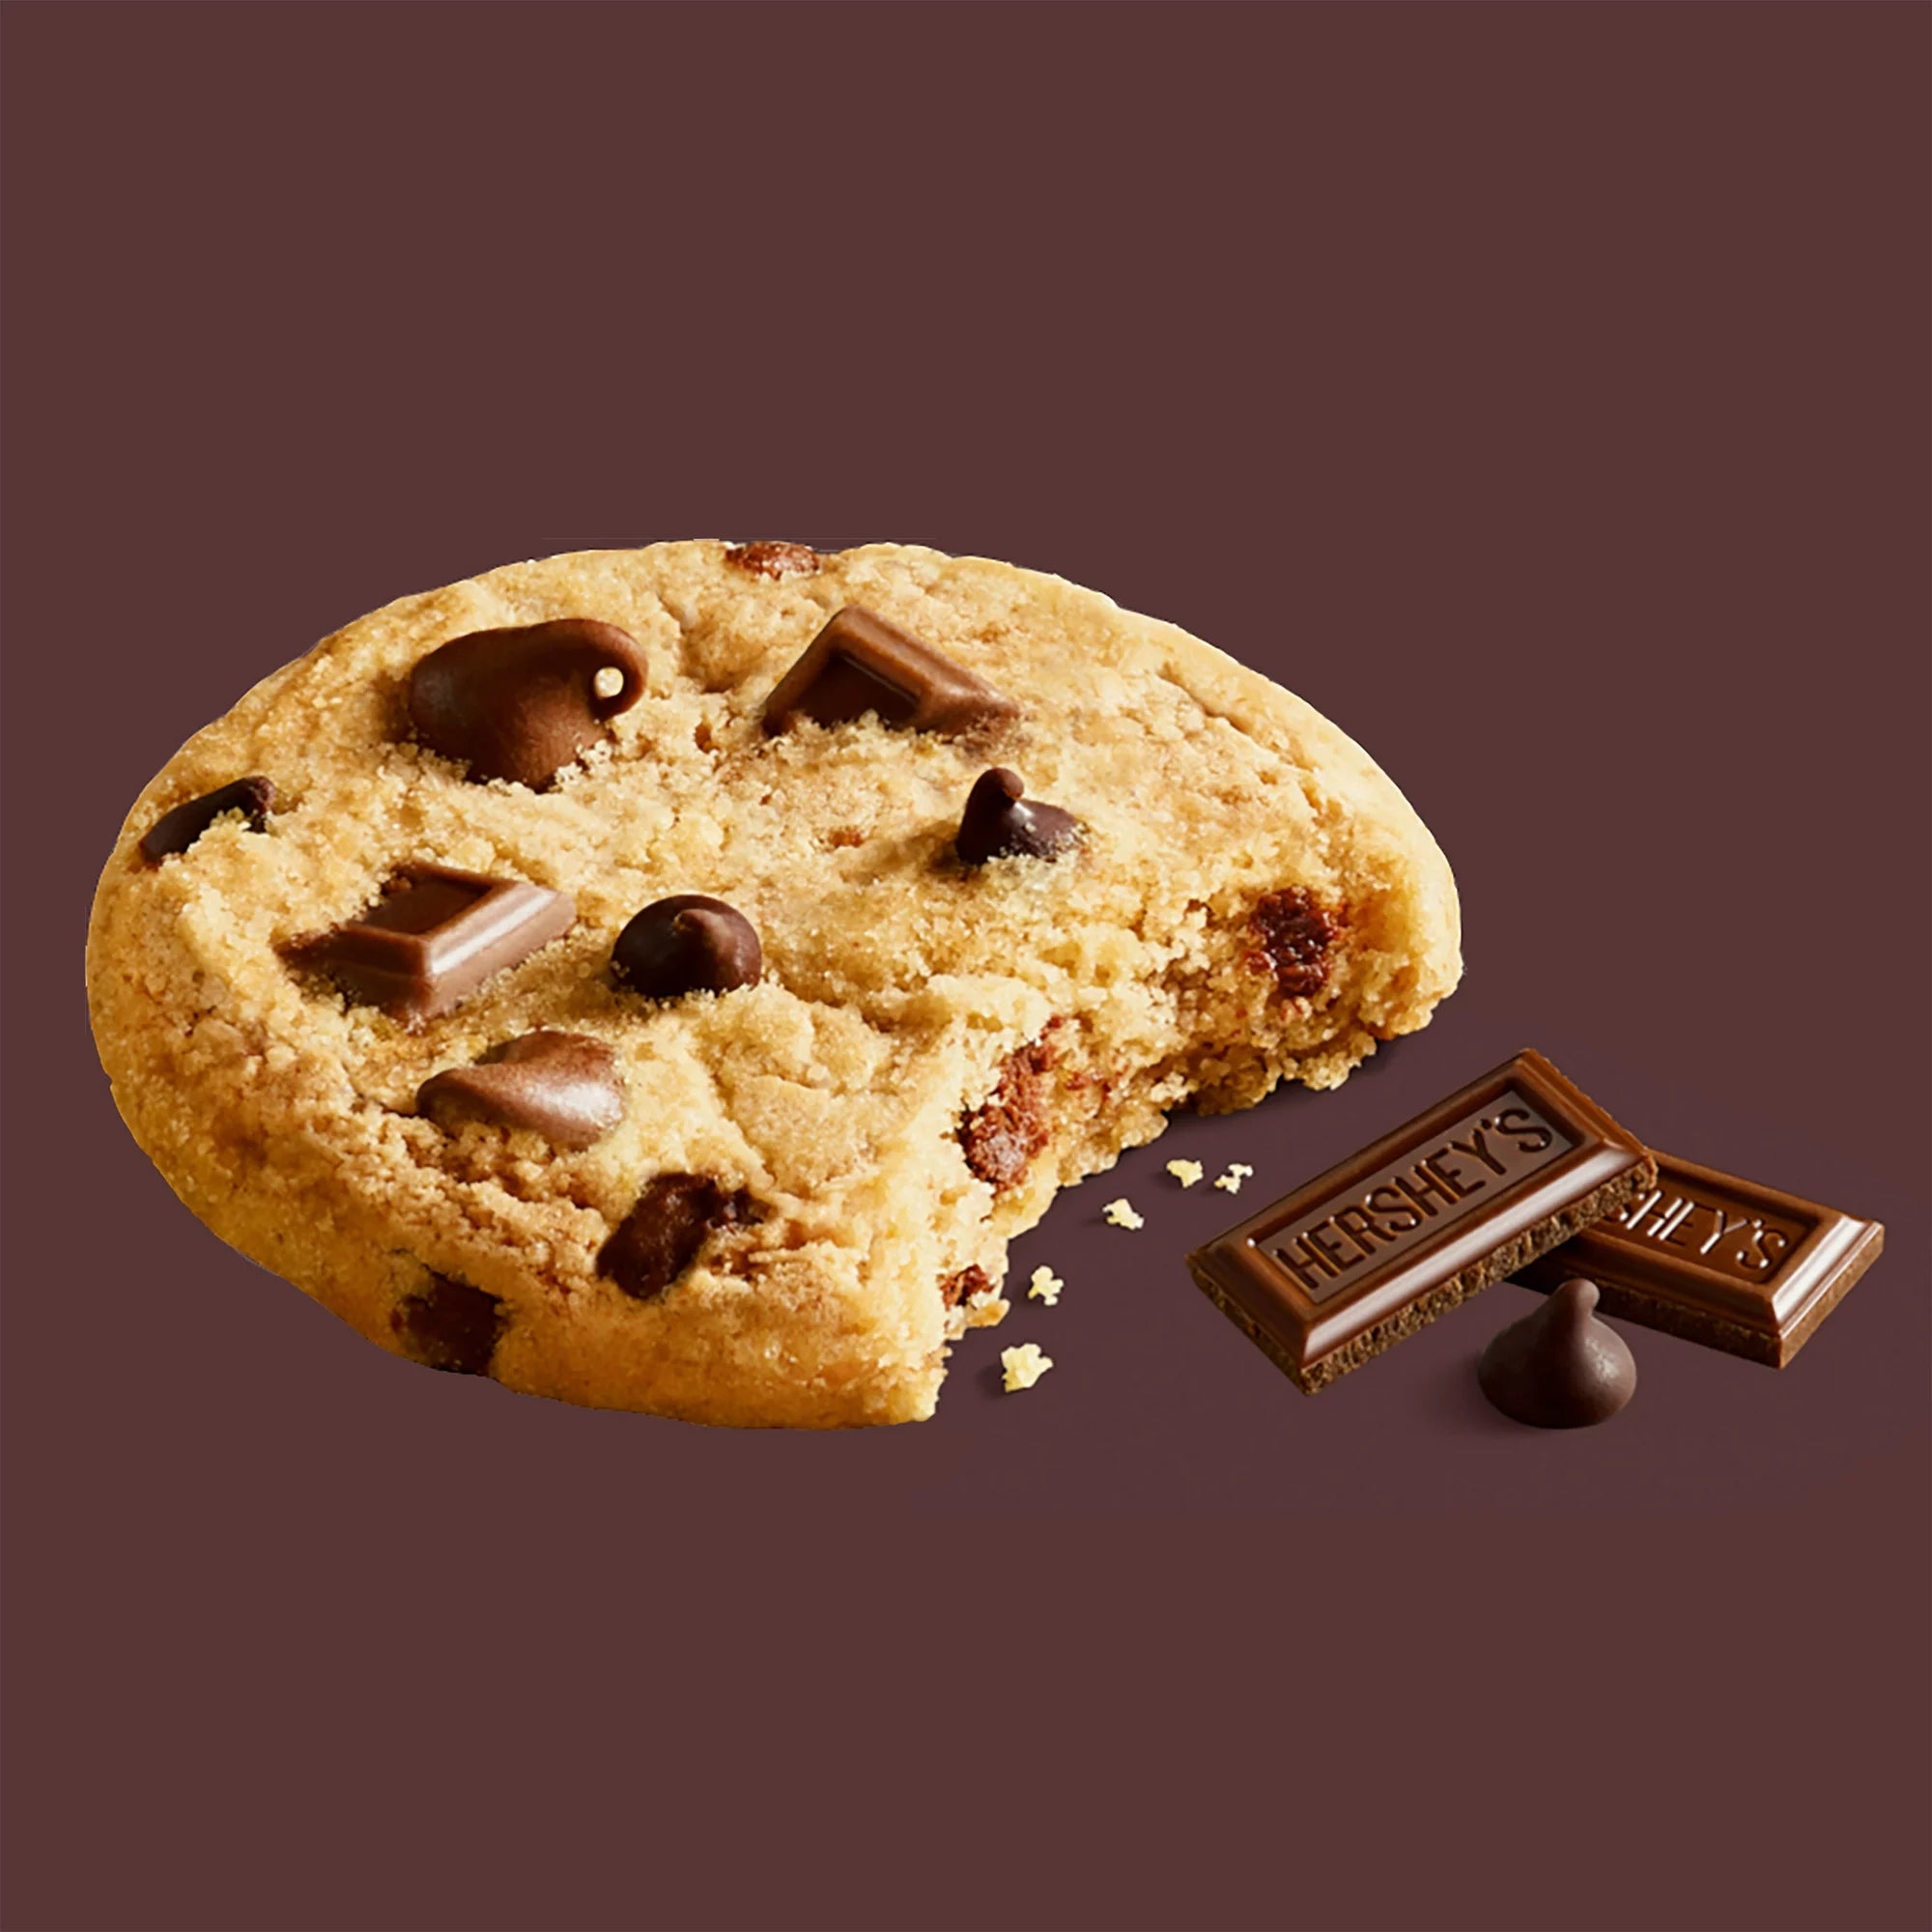 Chips Ahoy Cookie with Hershey Chocolate